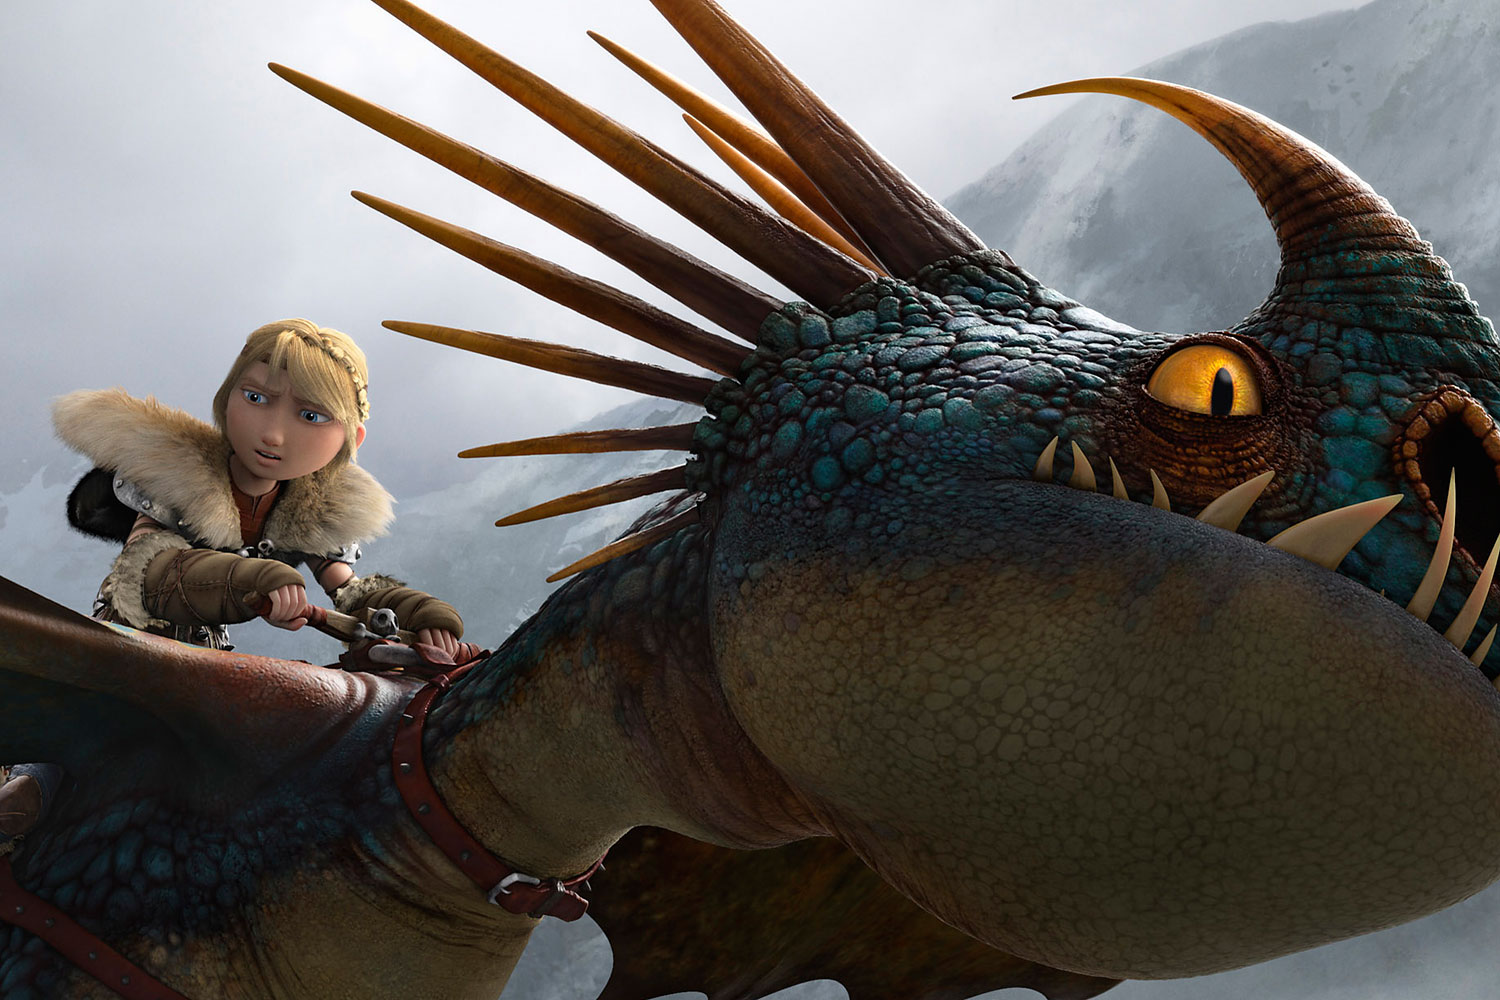 HOW TO TRAIN YOUR DRAGON 2